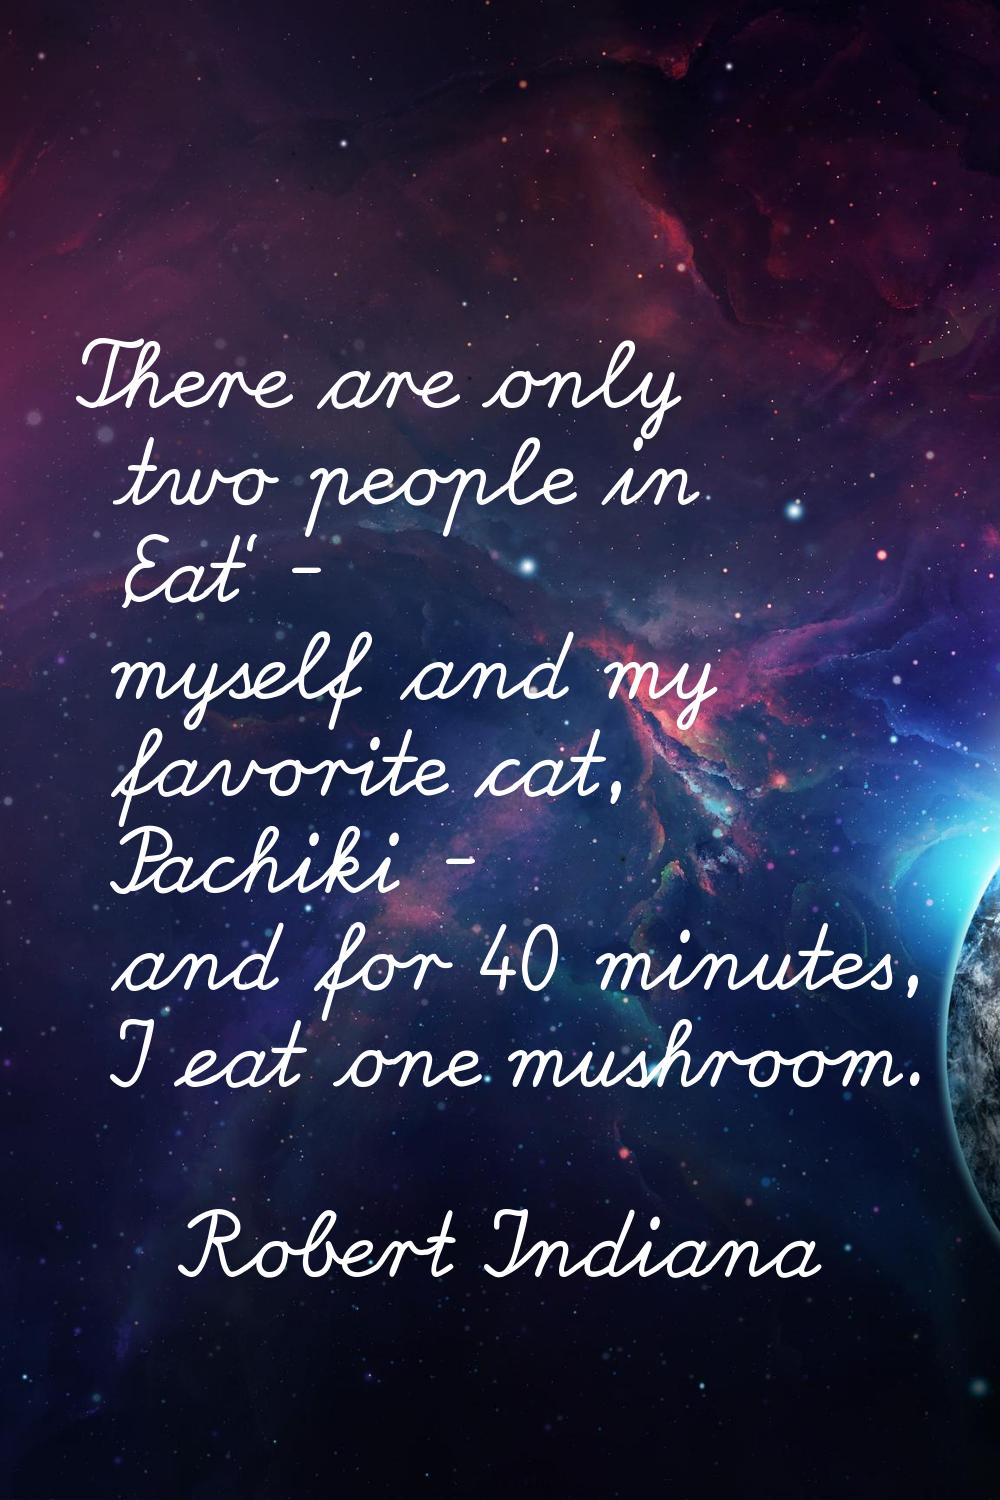 There are only two people in 'Eat' - myself and my favorite cat, Pachiki - and for 40 minutes, I ea